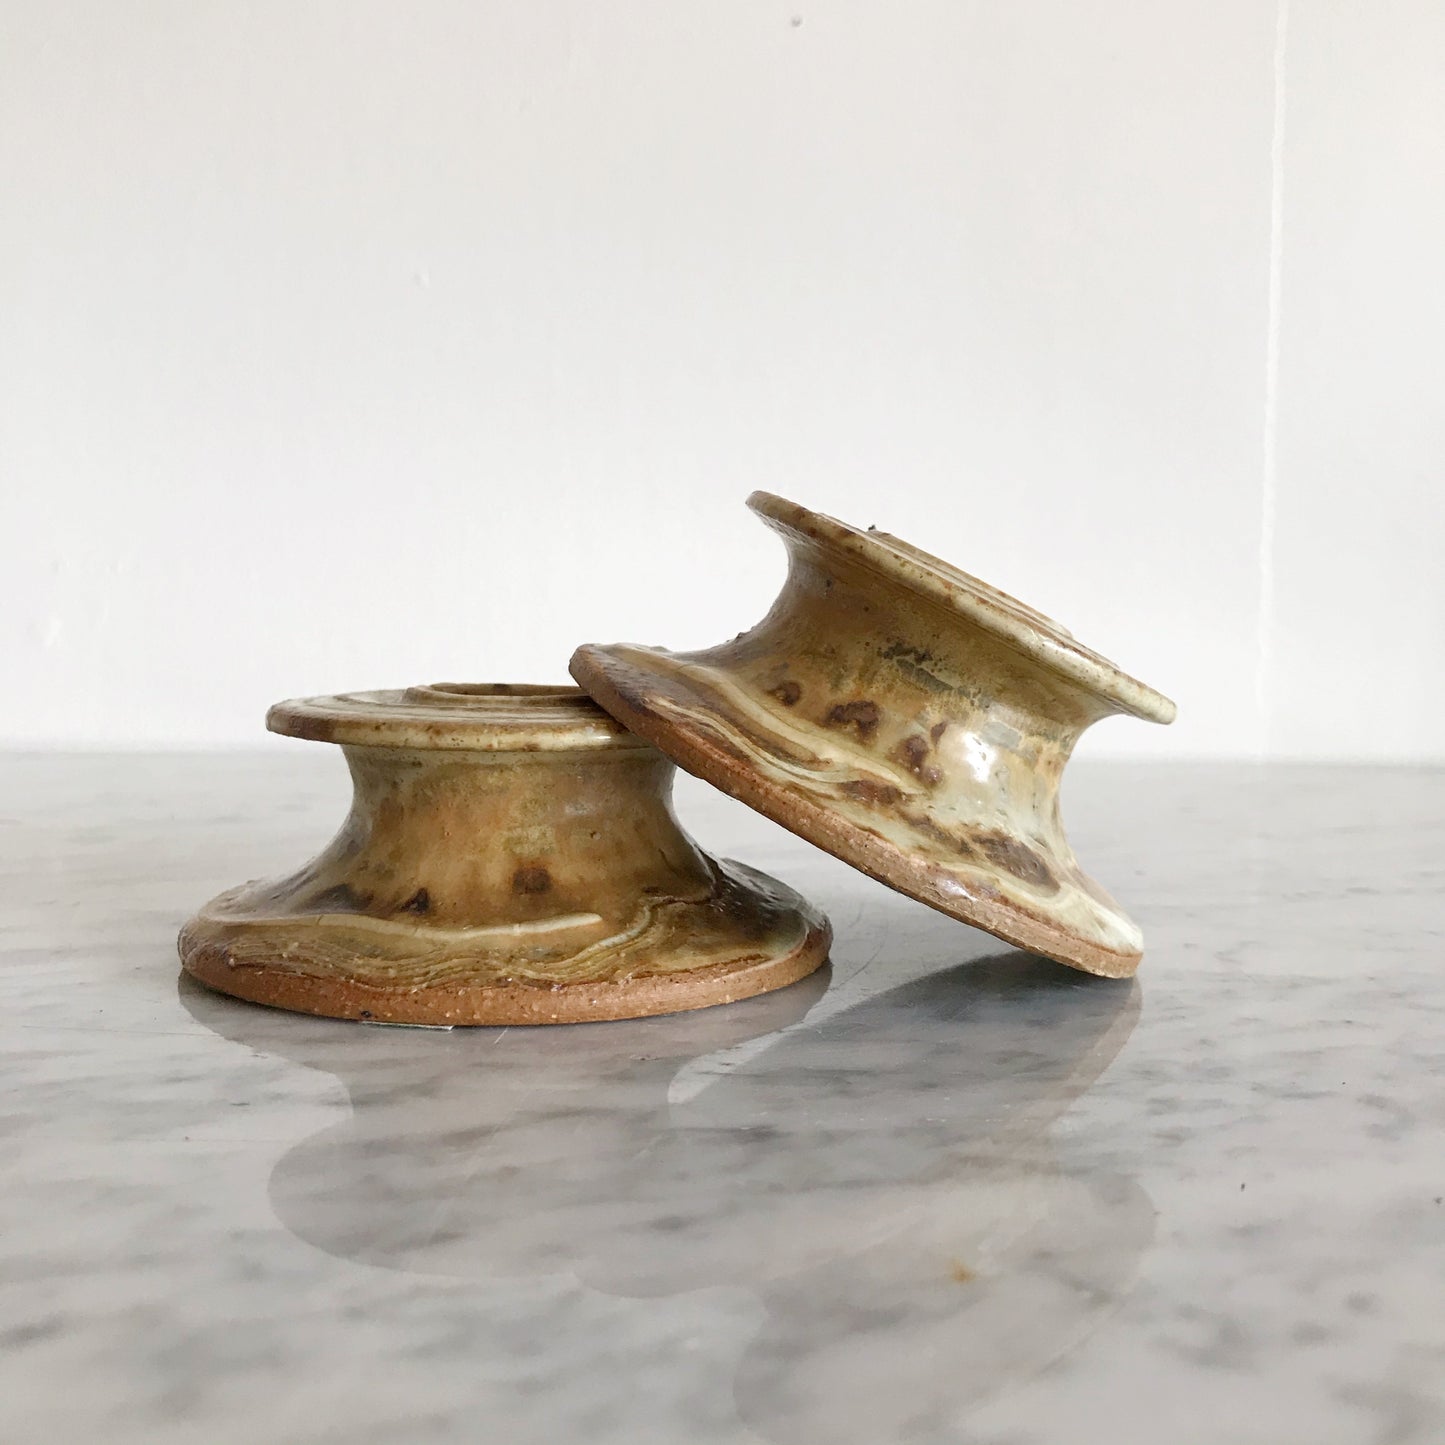 Pair of Vintage Pottery Candle Holders